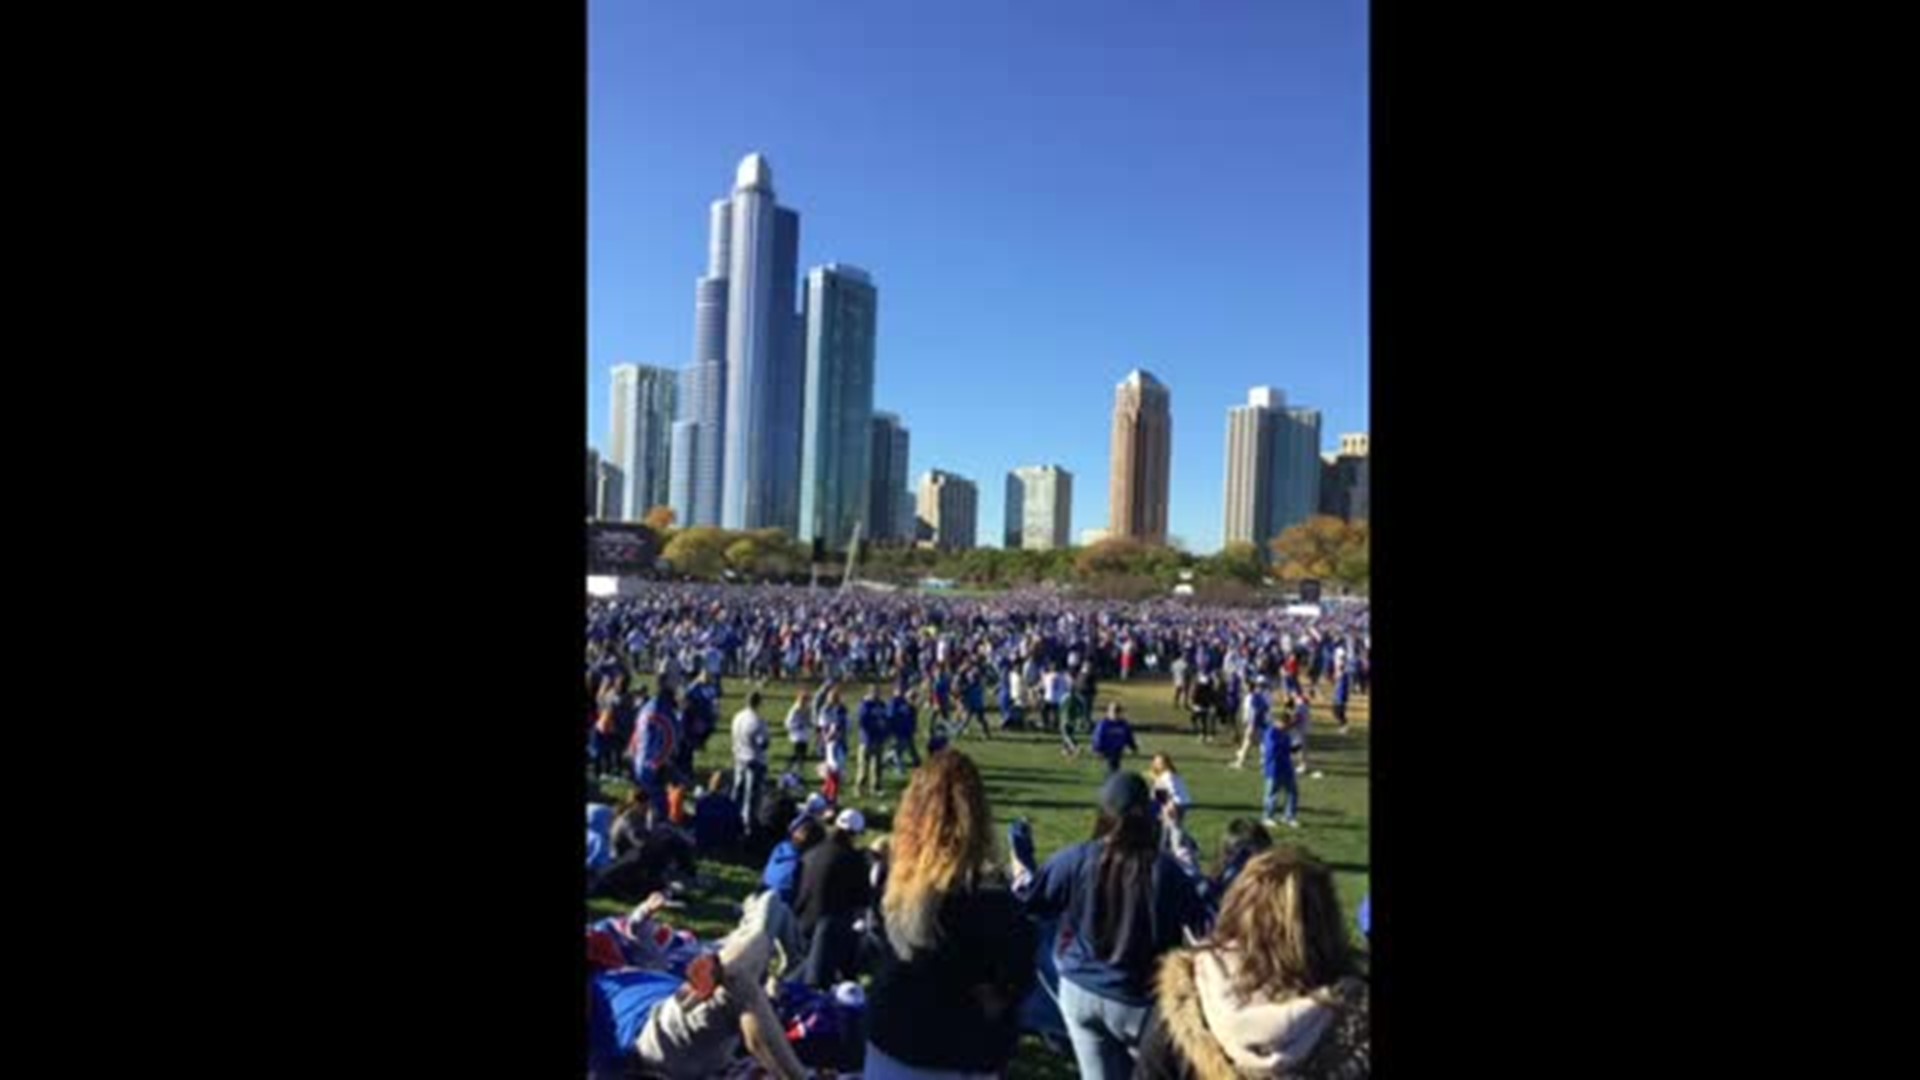 Cubs World Series Celebration in Chicago